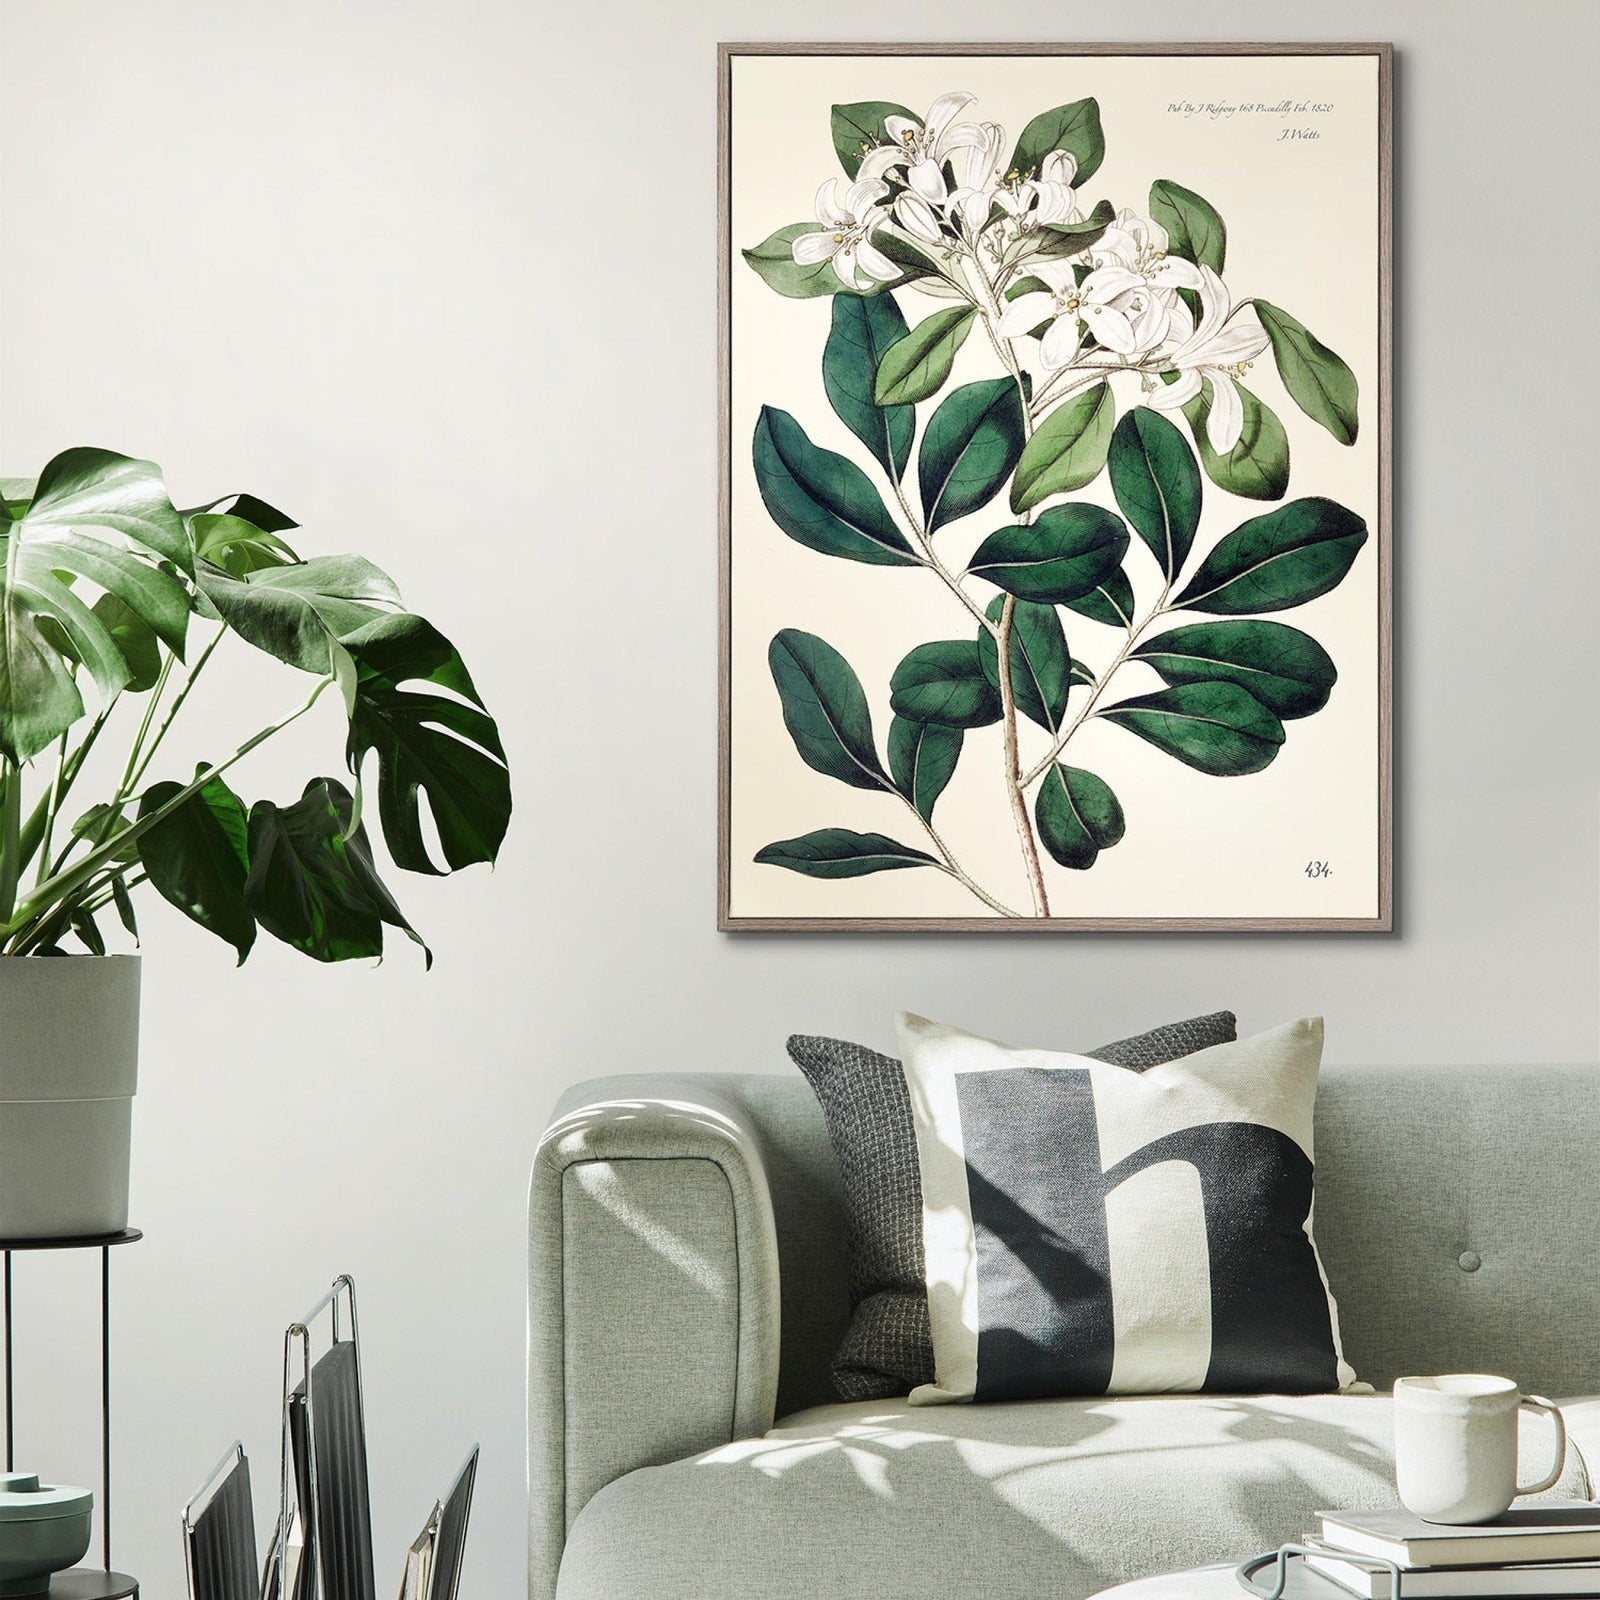 Gallery Interiors 'Foliage and Blooms' Framed Wall Art - 62.5 x 82.5cm